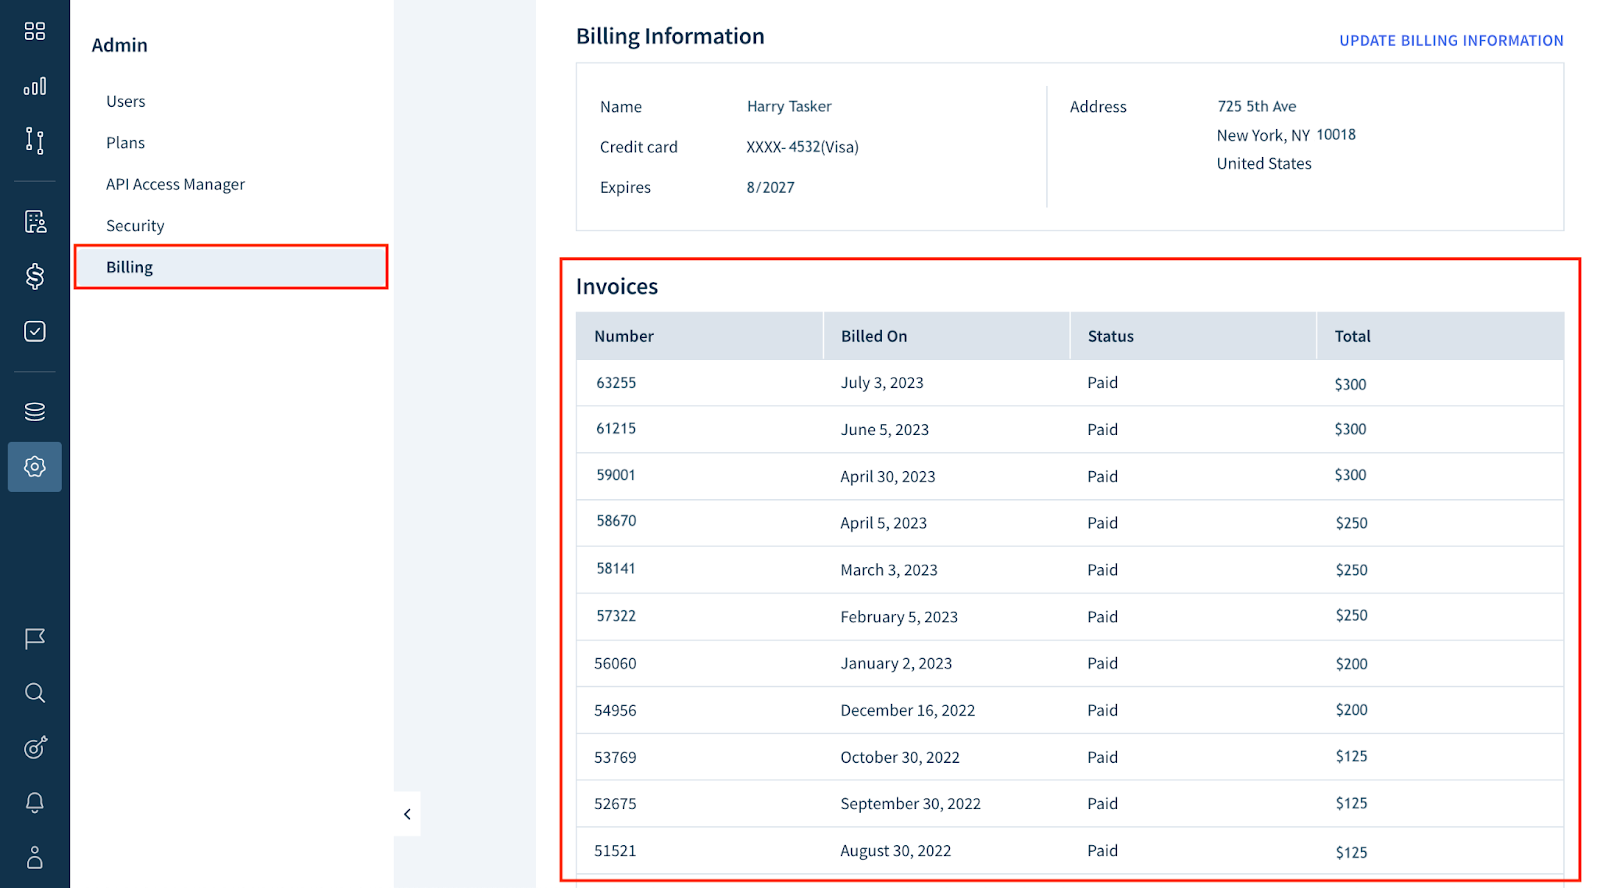 The Billing page showing two sections: Billing Information and Invoices. The Invoices section lists all customer’s invoices as a table with the following columns: Number, Billed On, Status, and Total.